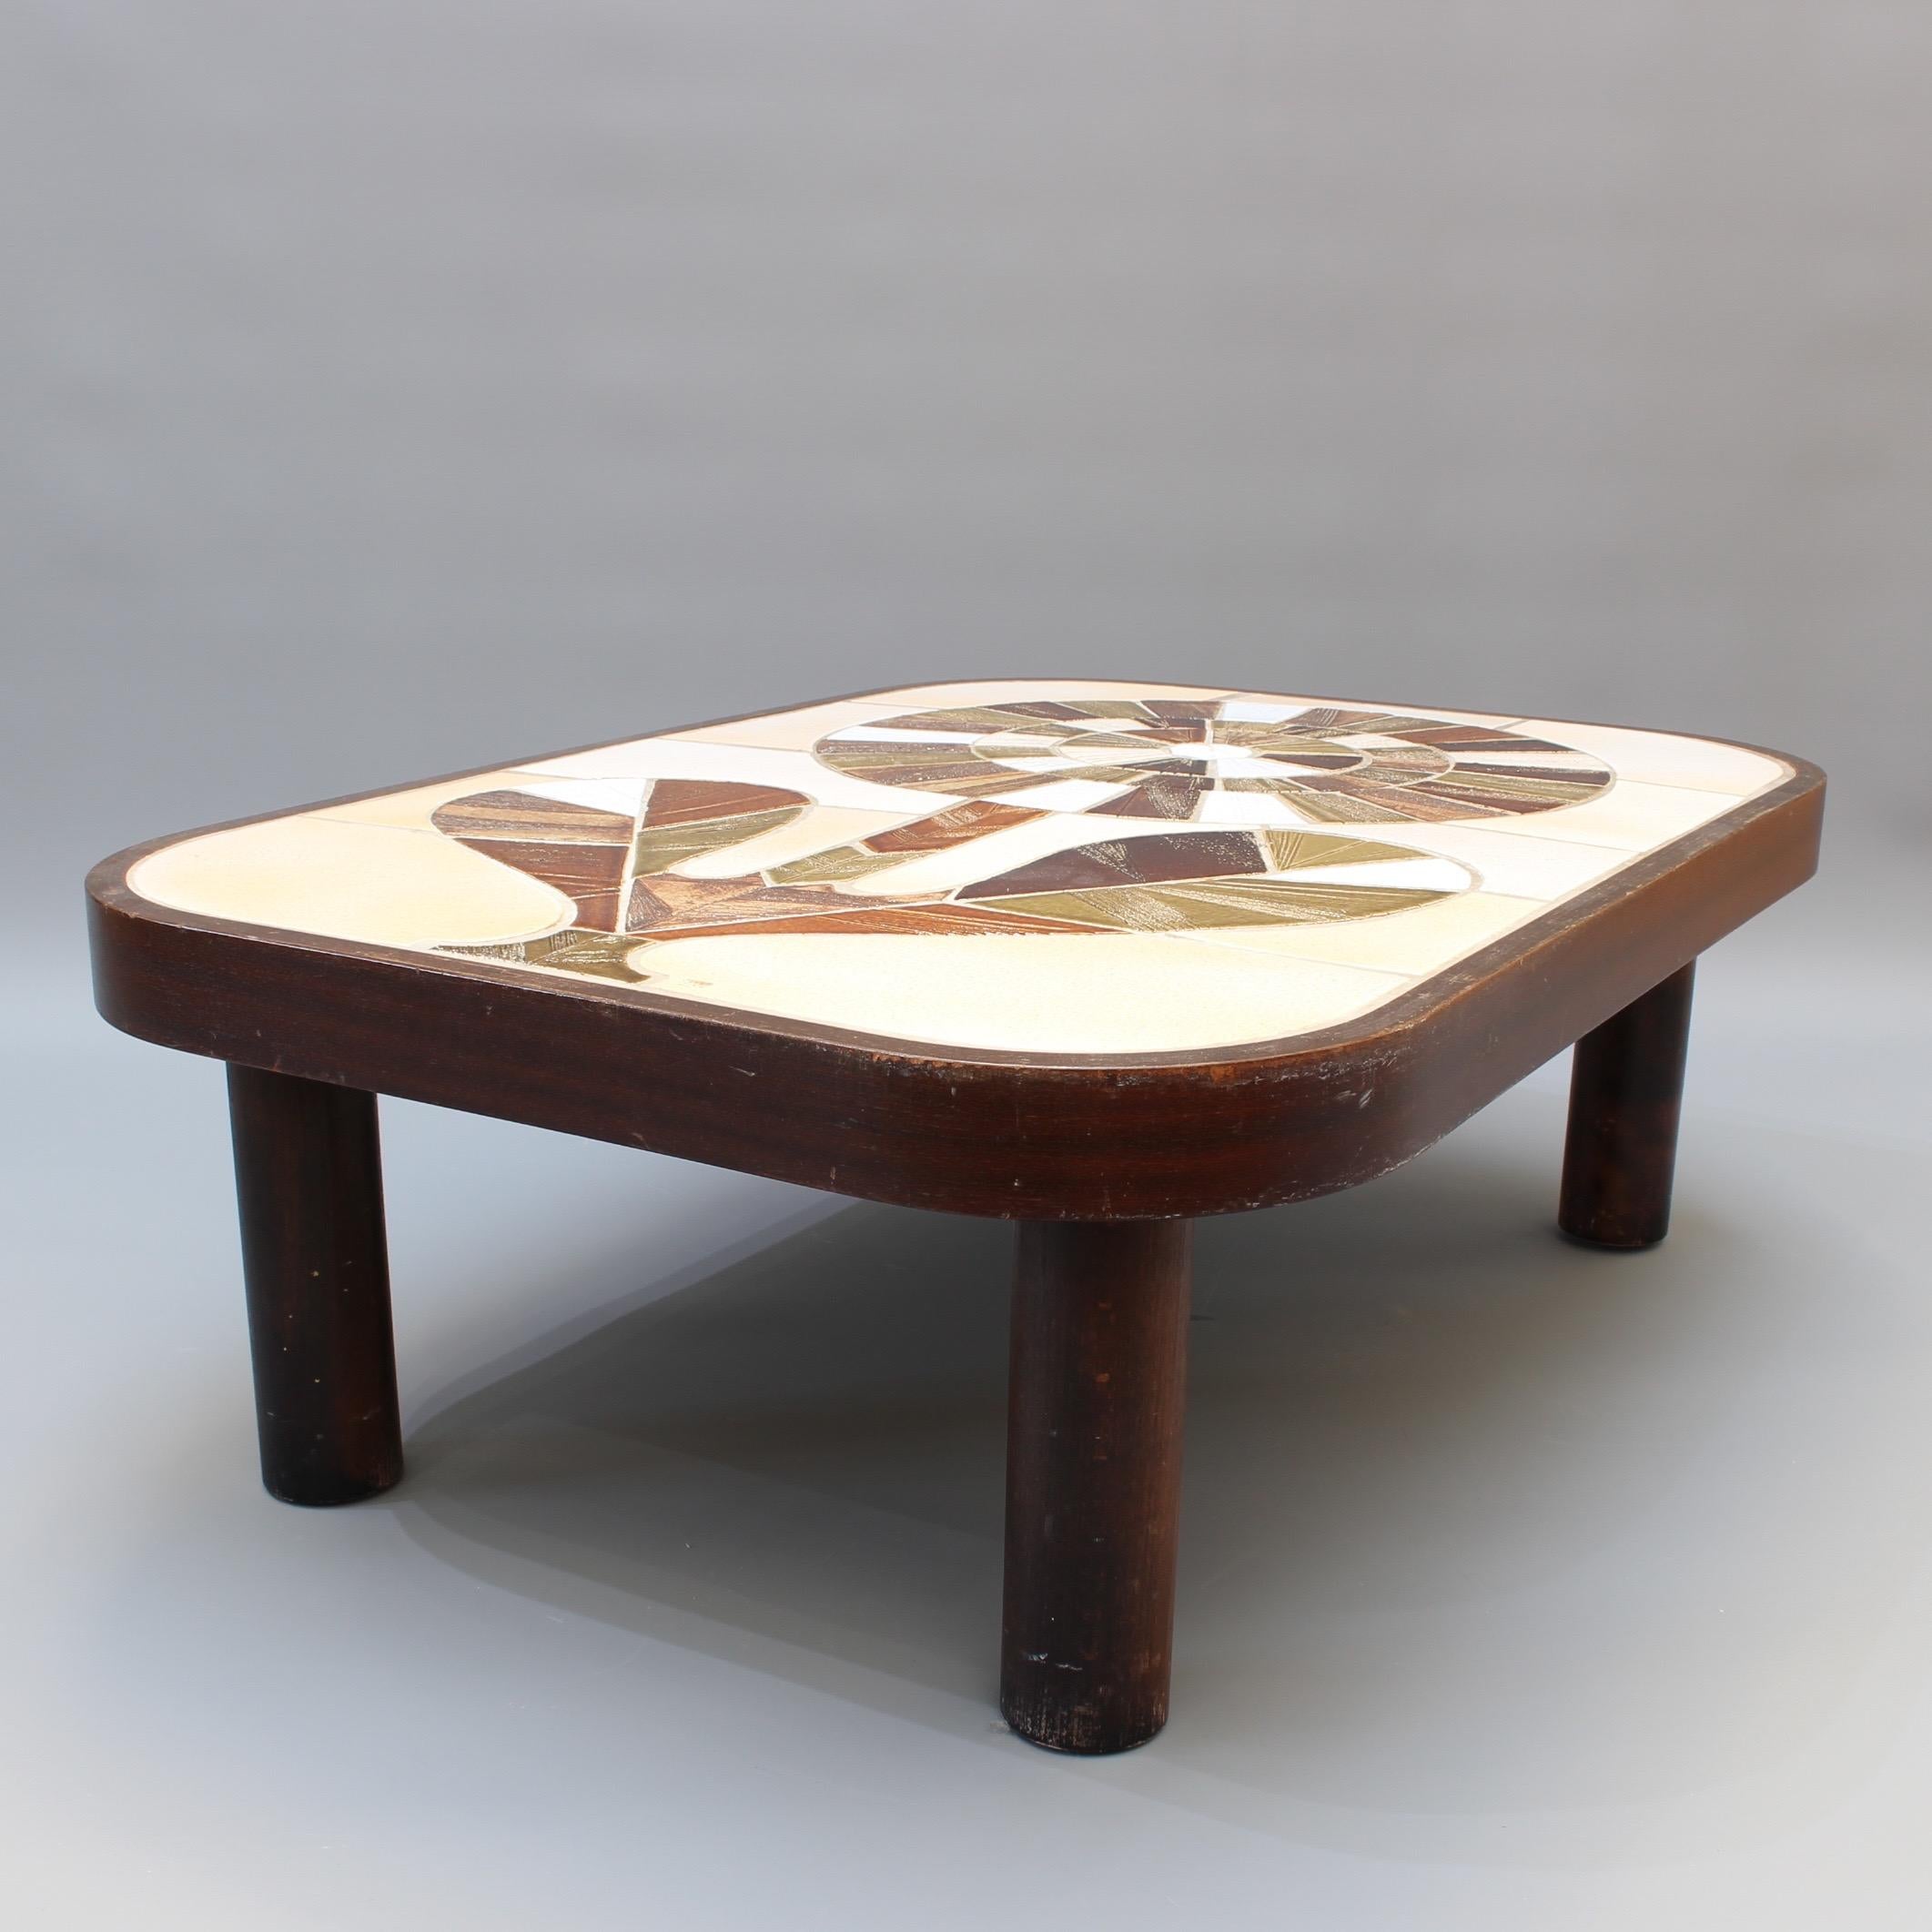 Late 20th Century Ceramic Tiled Coffee Table by Roger Capron, circa 1970s